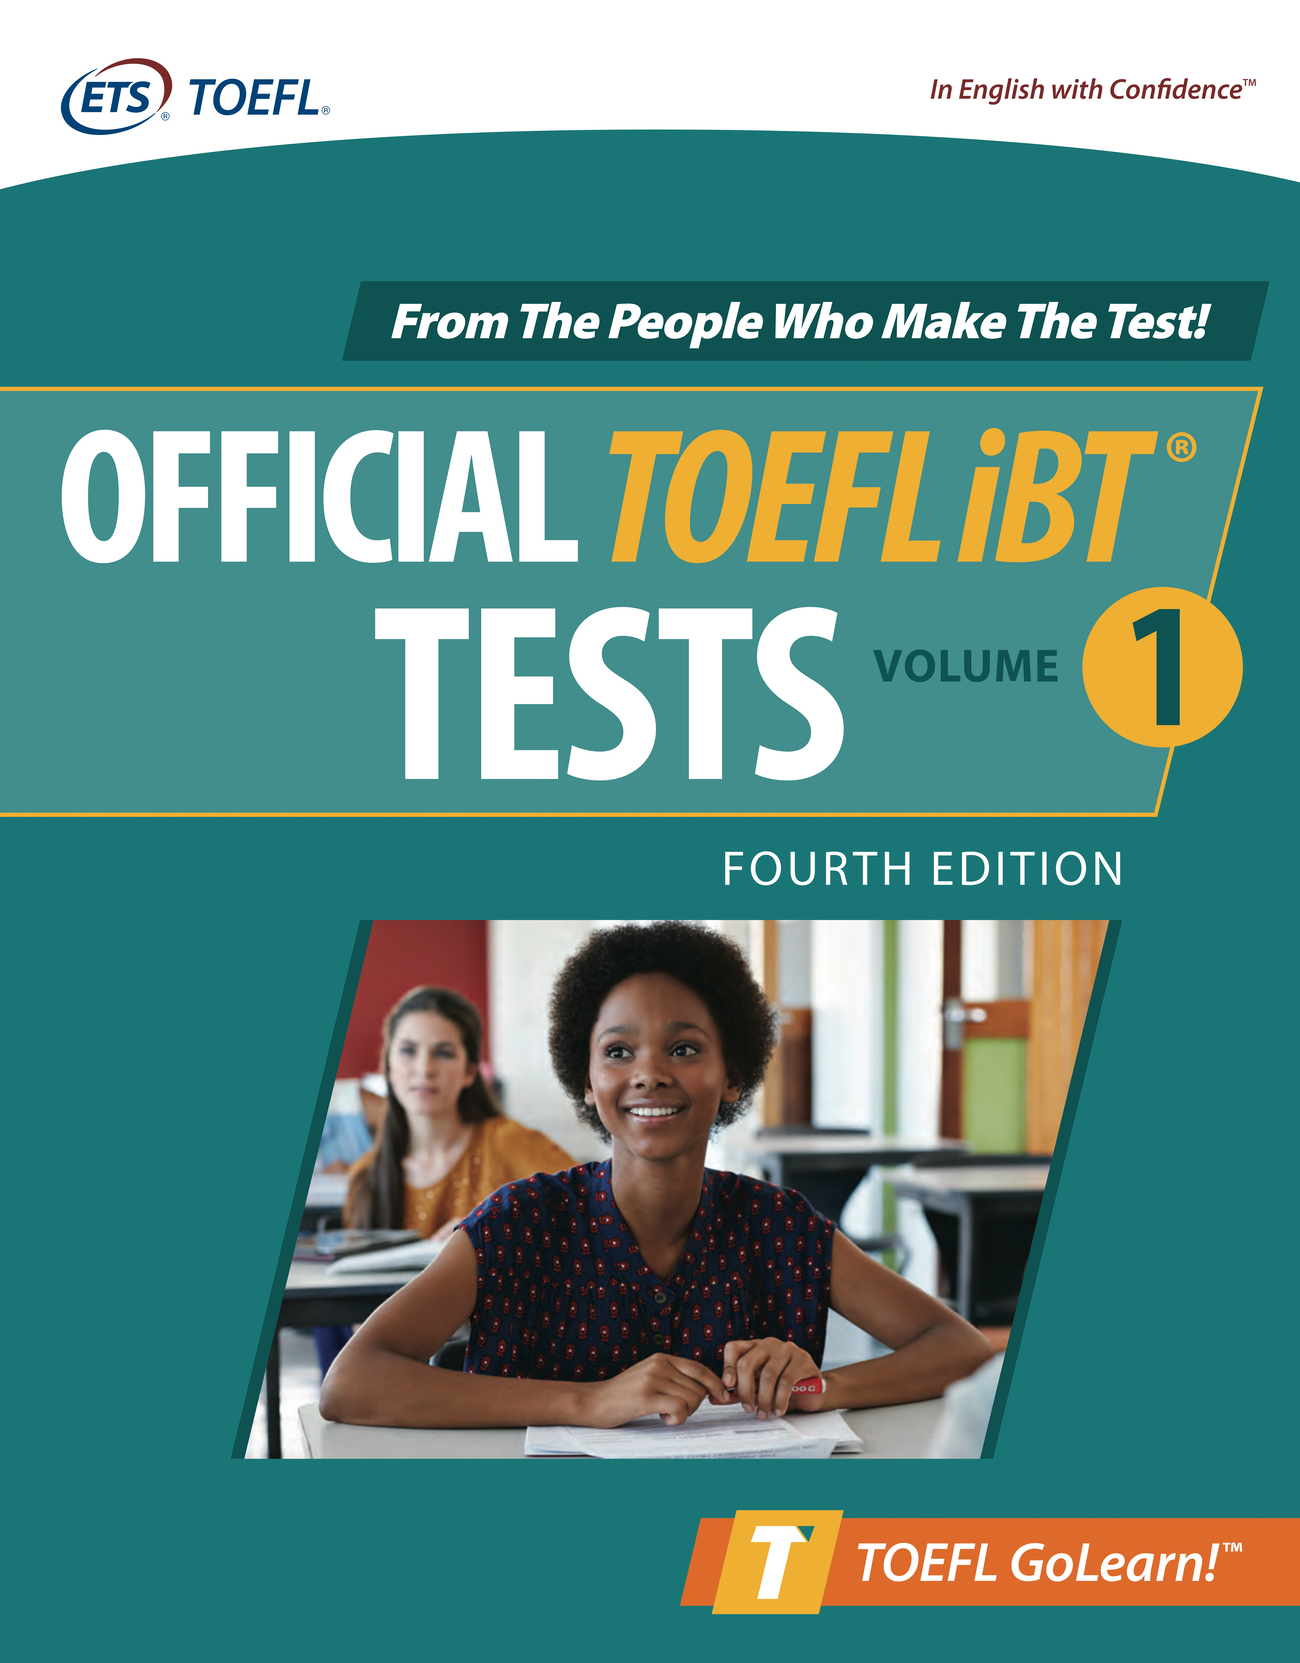 Official TOEFL iBT Tests book cover